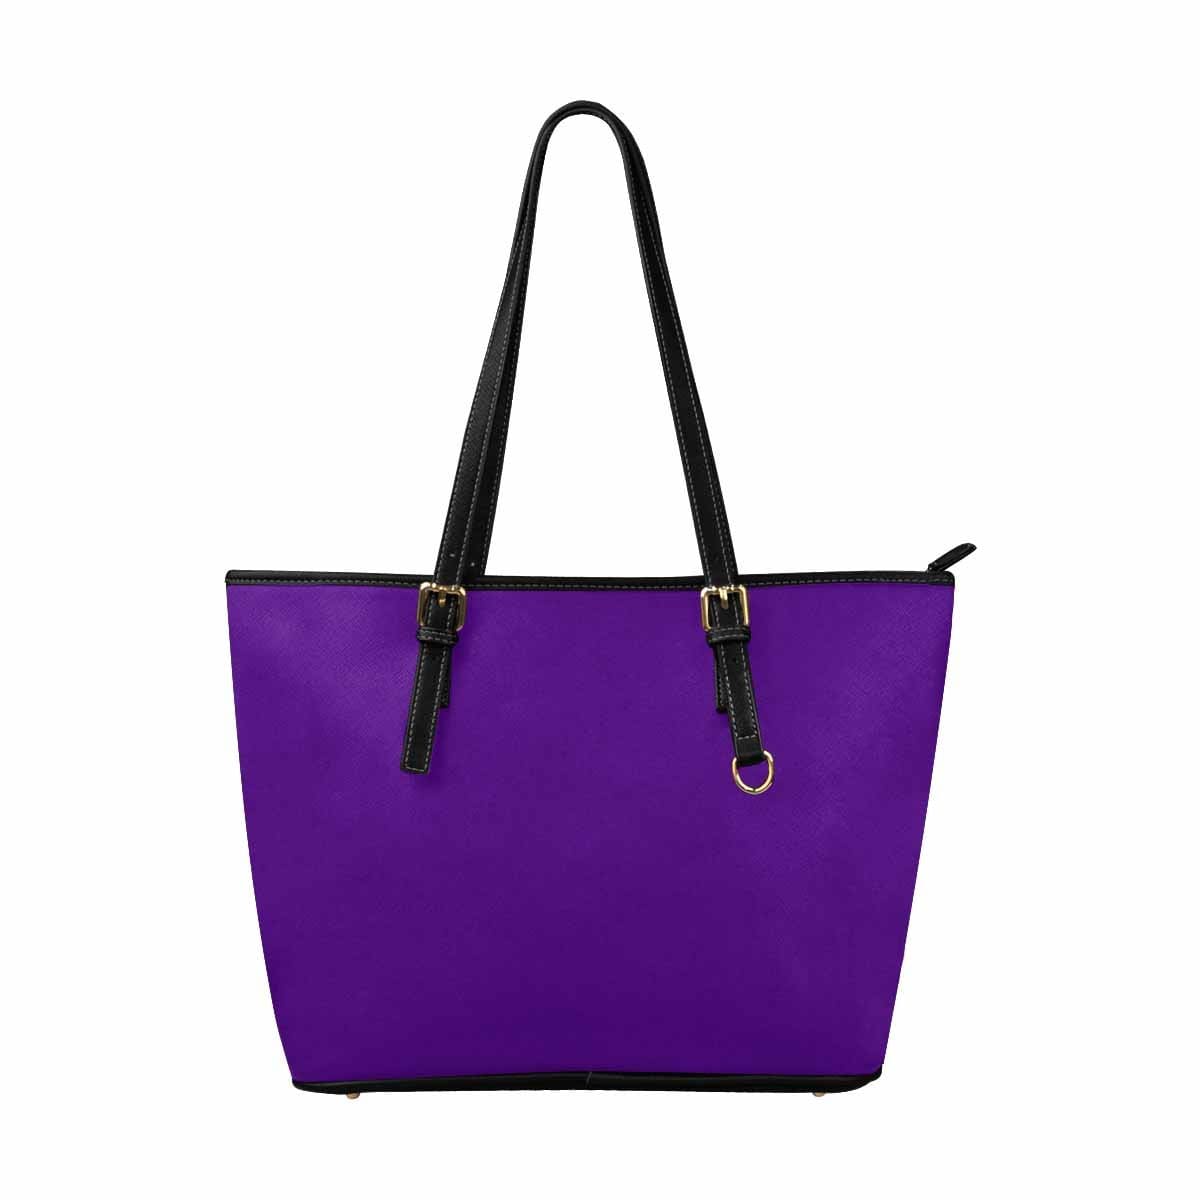 Large Leather Tote Shoulder Bag - Indigo Purple - Bags | Leather Tote Bags